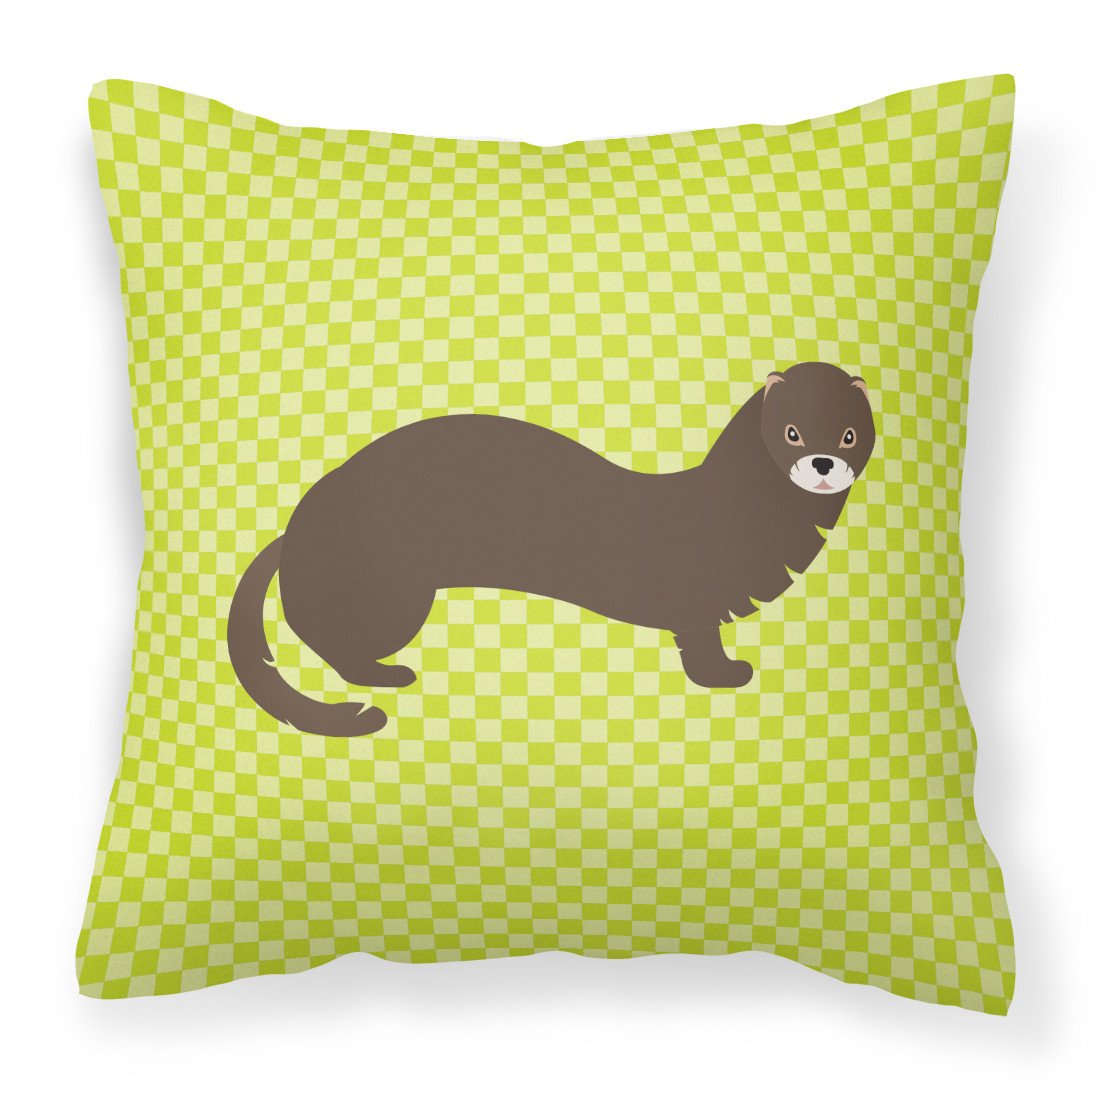 Russian or European Mink Green Fabric Decorative Pillow BB7694PW1818 by Caroline's Treasures